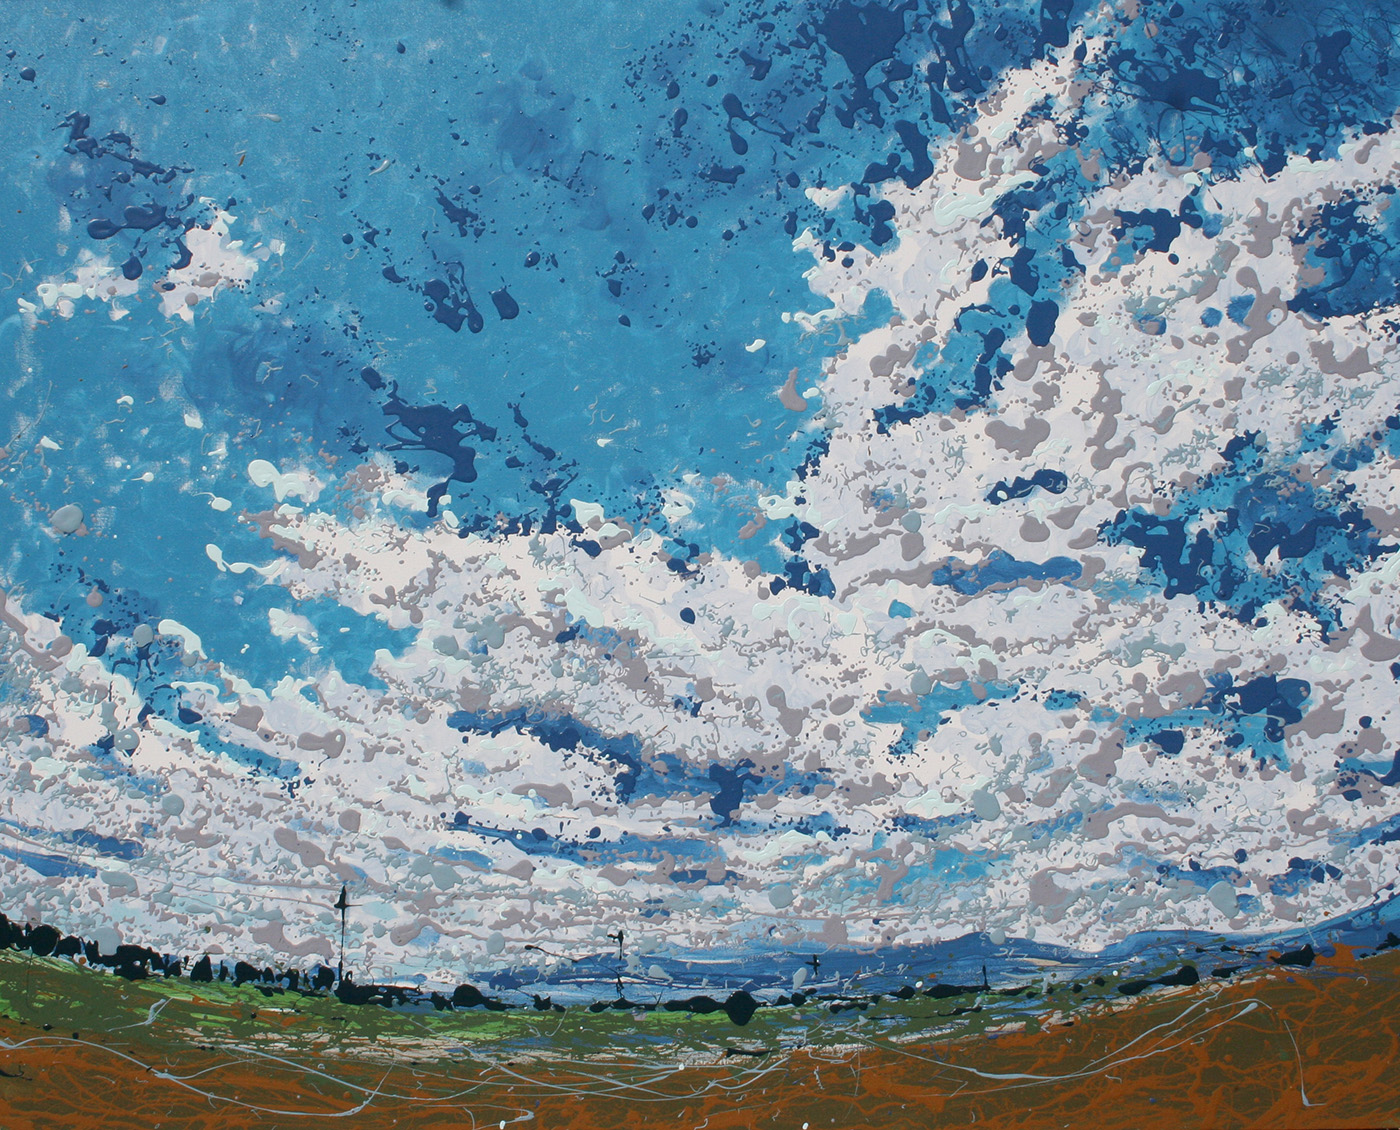 Cloud Latex Enamel Painting on Gallery Wrapped Canvas by Fort Collins, Colorado Artist Lisa Cameron Russell